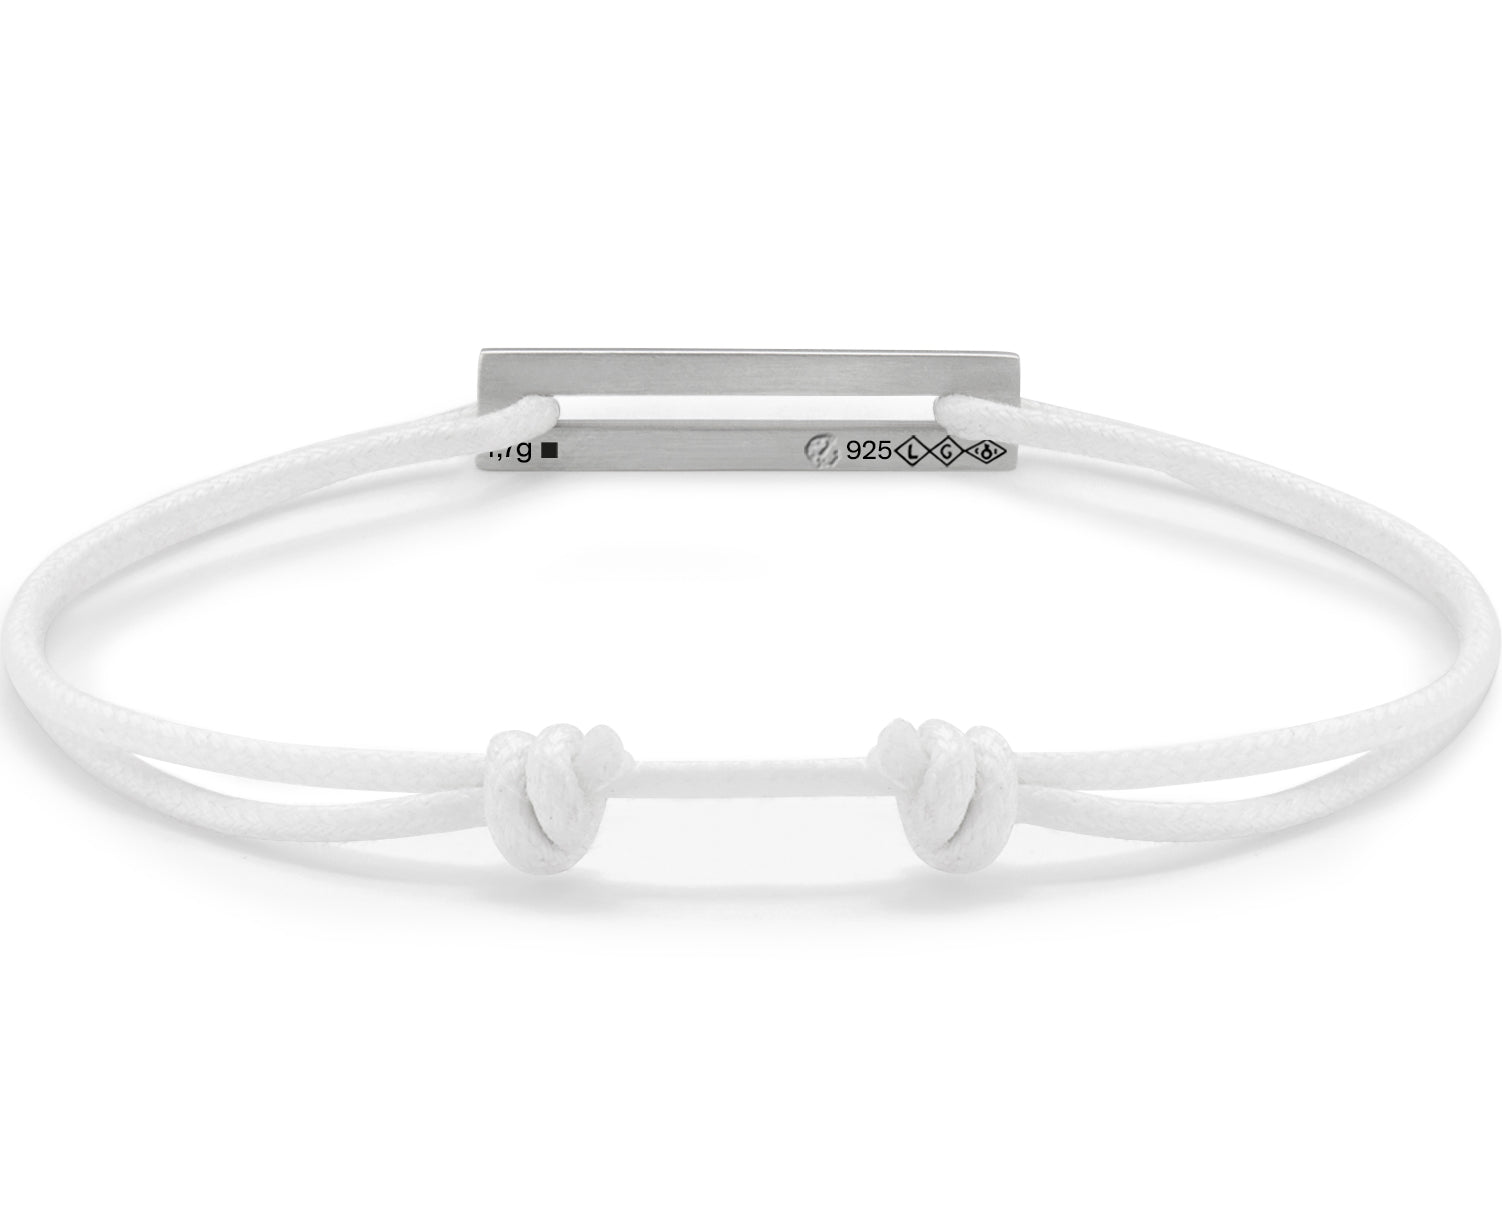 perforated white cord bracelet le 1.7g